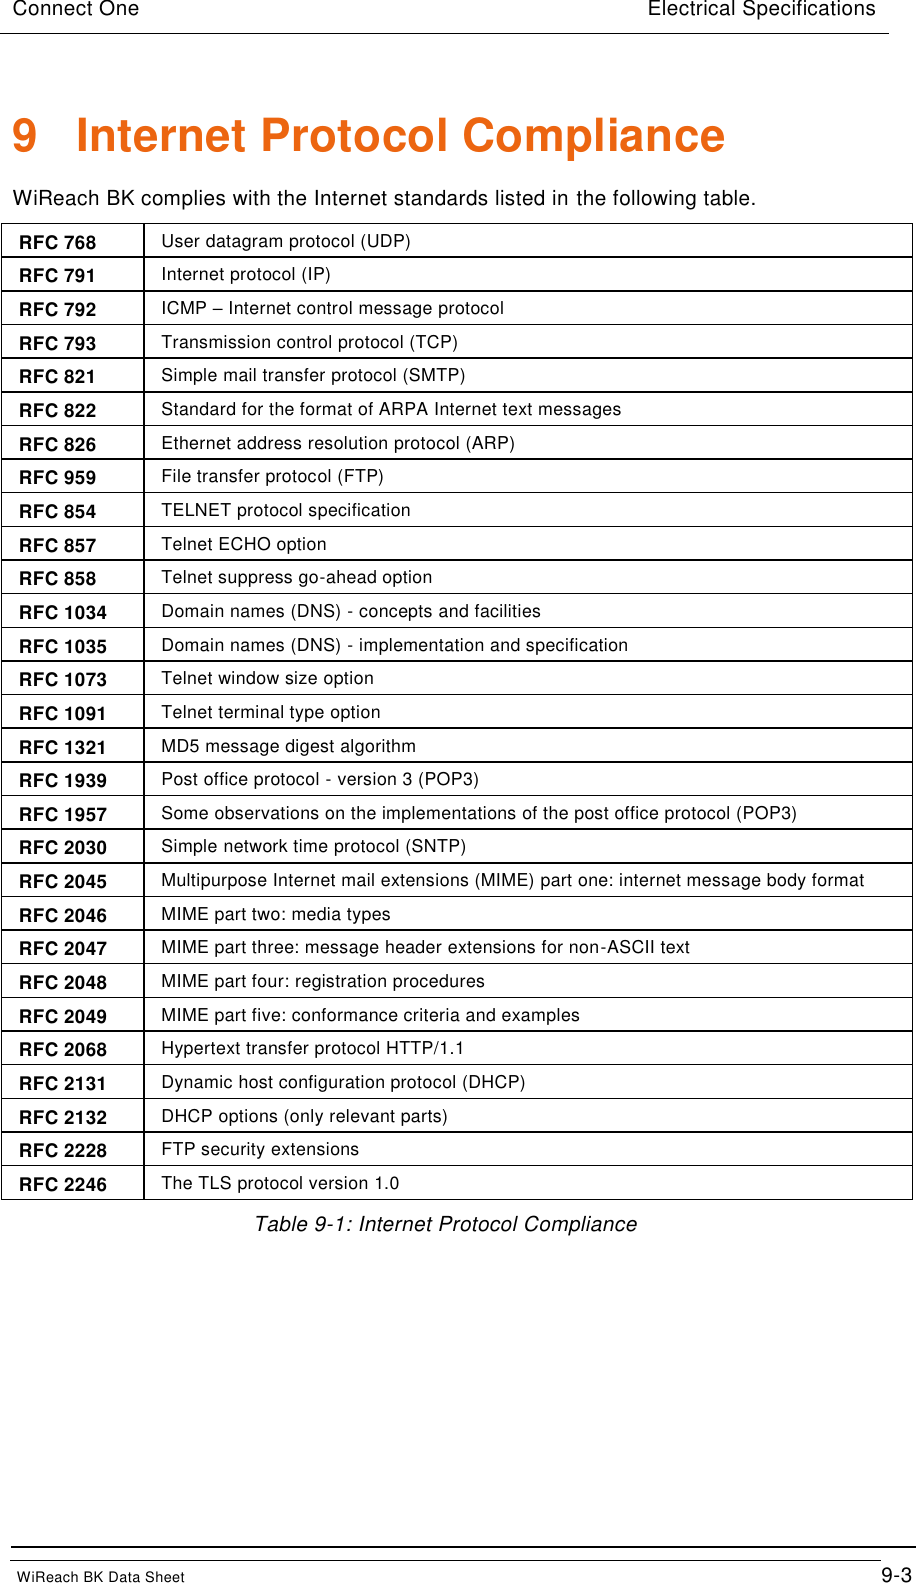 Connect One                                Electrical Specifications                                                    WiReach BK Data Sheet                                         9-3 9  Internet Protocol Compliance WiReach BK complies with the Internet standards listed in the following table. RFC 768 User datagram protocol (UDP) RFC 791 Internet protocol (IP) RFC 792 ICMP – Internet control message protocol RFC 793 Transmission control protocol (TCP) RFC 821 Simple mail transfer protocol (SMTP) RFC 822 Standard for the format of ARPA Internet text messages RFC 826 Ethernet address resolution protocol (ARP) RFC 959 File transfer protocol (FTP) RFC 854 TELNET protocol specification RFC 857 Telnet ECHO option RFC 858 Telnet suppress go-ahead option RFC 1034 Domain names (DNS) - concepts and facilities RFC 1035 Domain names (DNS) - implementation and specification RFC 1073 Telnet window size option RFC 1091 Telnet terminal type option RFC 1321 MD5 message digest algorithm RFC 1939 Post office protocol - version 3 (POP3) RFC 1957 Some observations on the implementations of the post office protocol (POP3) RFC 2030 Simple network time protocol (SNTP) RFC 2045 Multipurpose Internet mail extensions (MIME) part one: internet message body format RFC 2046 MIME part two: media types RFC 2047 MIME part three: message header extensions for non-ASCII text RFC 2048 MIME part four: registration procedures RFC 2049 MIME part five: conformance criteria and examples RFC 2068 Hypertext transfer protocol HTTP/1.1 RFC 2131 Dynamic host configuration protocol (DHCP) RFC 2132 DHCP options (only relevant parts) RFC 2228 FTP security extensions RFC 2246 The TLS protocol version 1.0 Table 9-1: Internet Protocol Compliance    